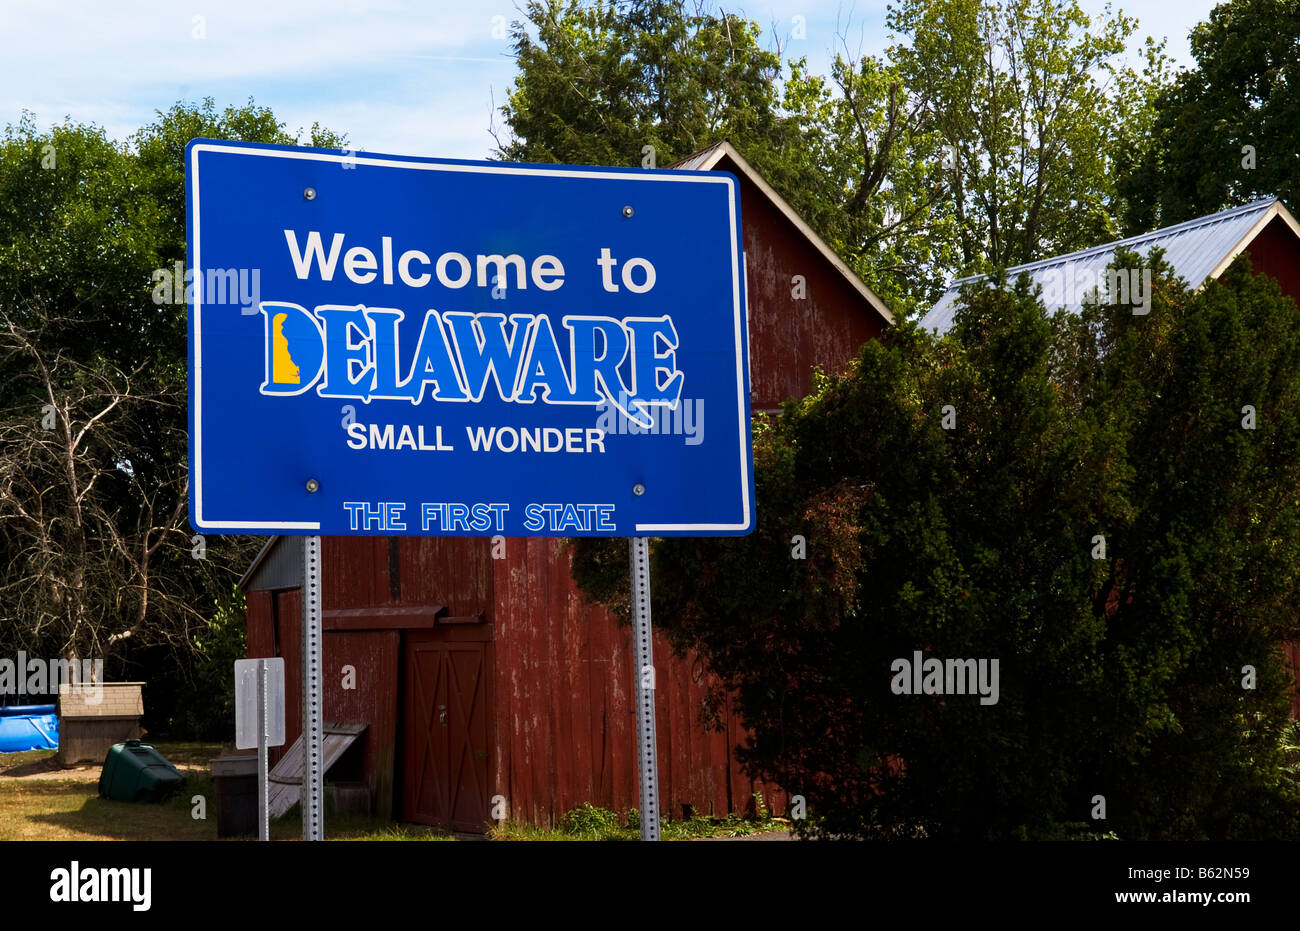 Welcome to Delaware sign of First State in US history and first to ratify US Constitution in 1787 Colonial times Stock Photo